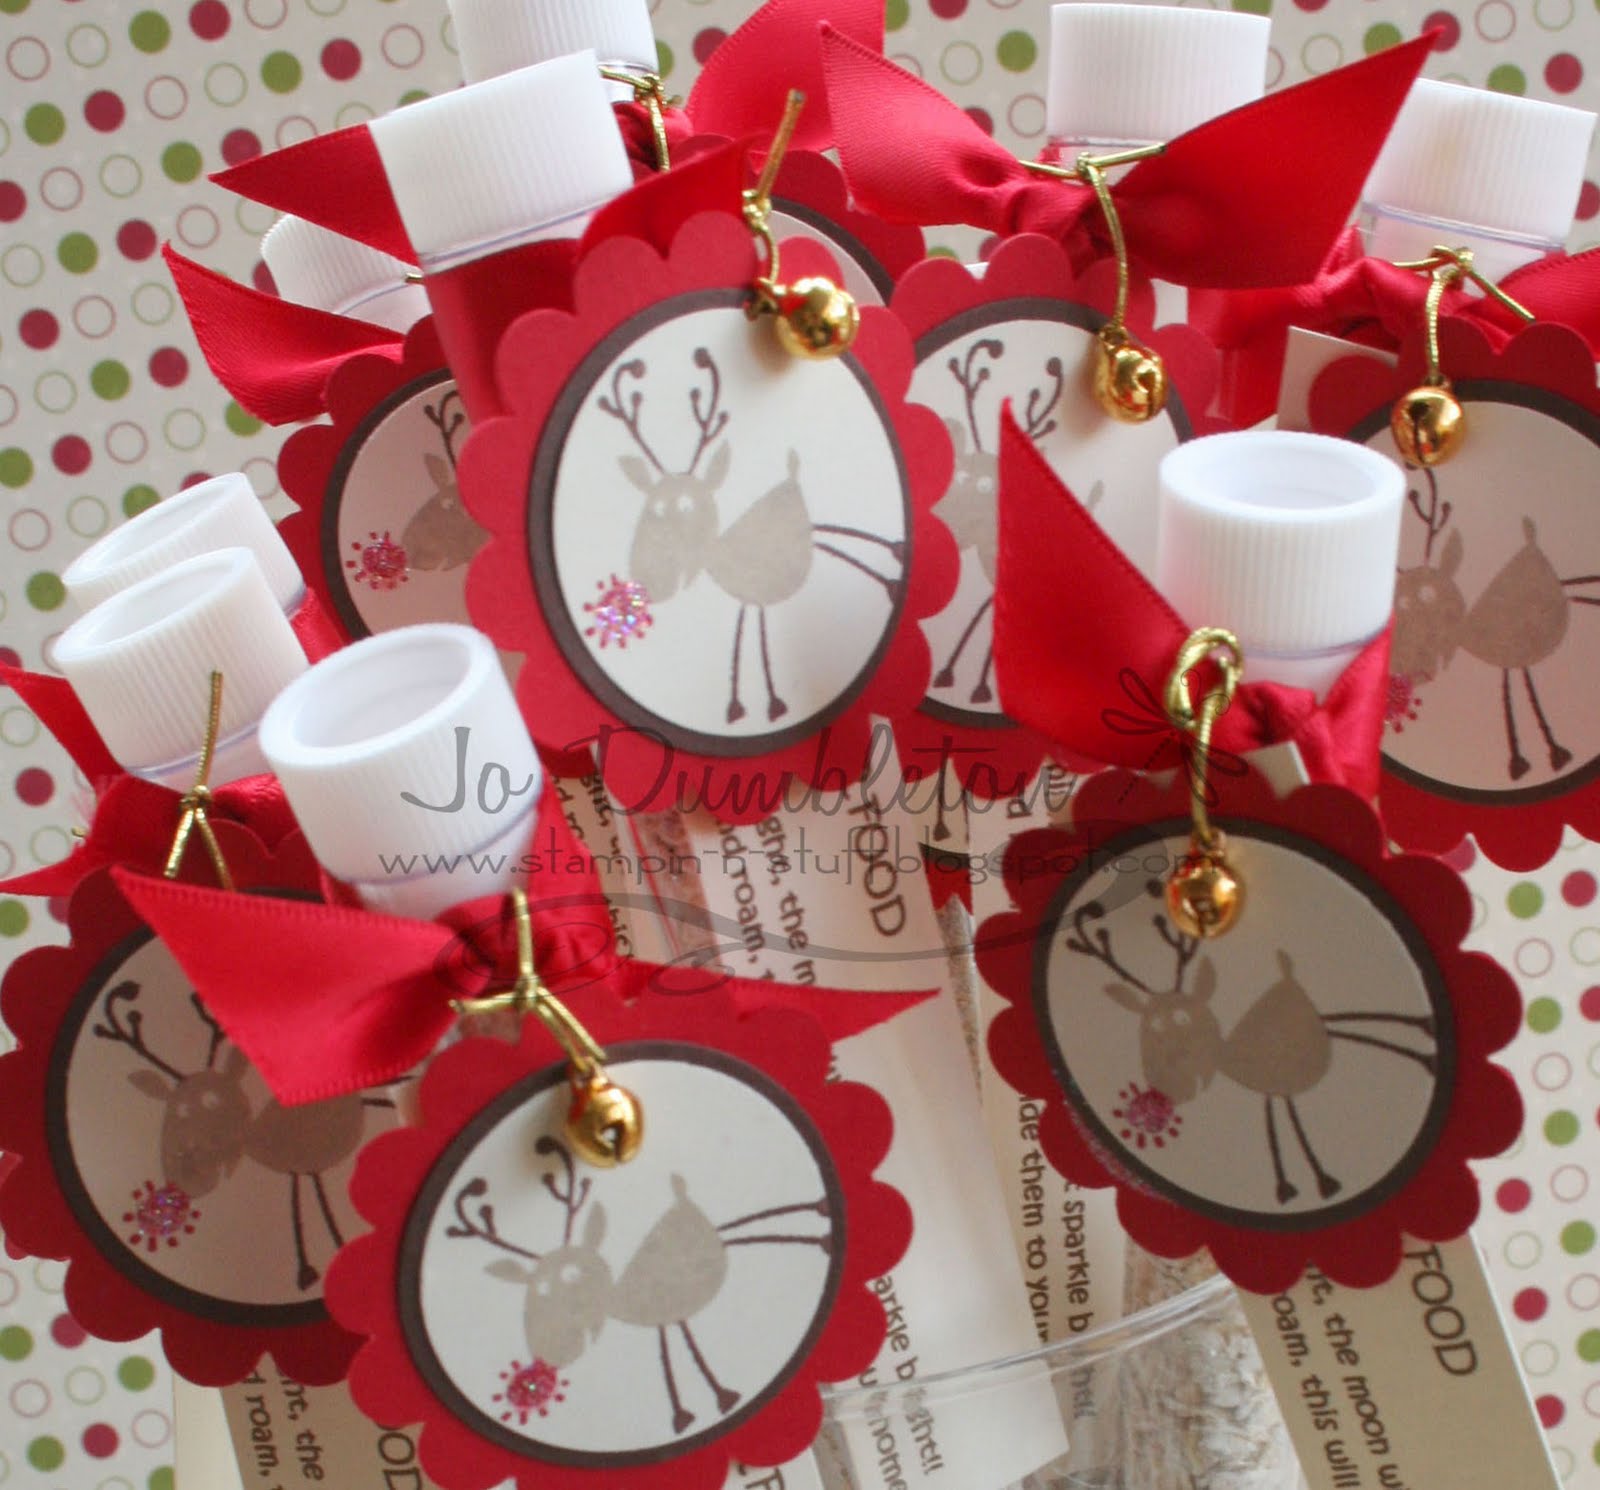 Christmas Ideas to Sell at Craft Fair